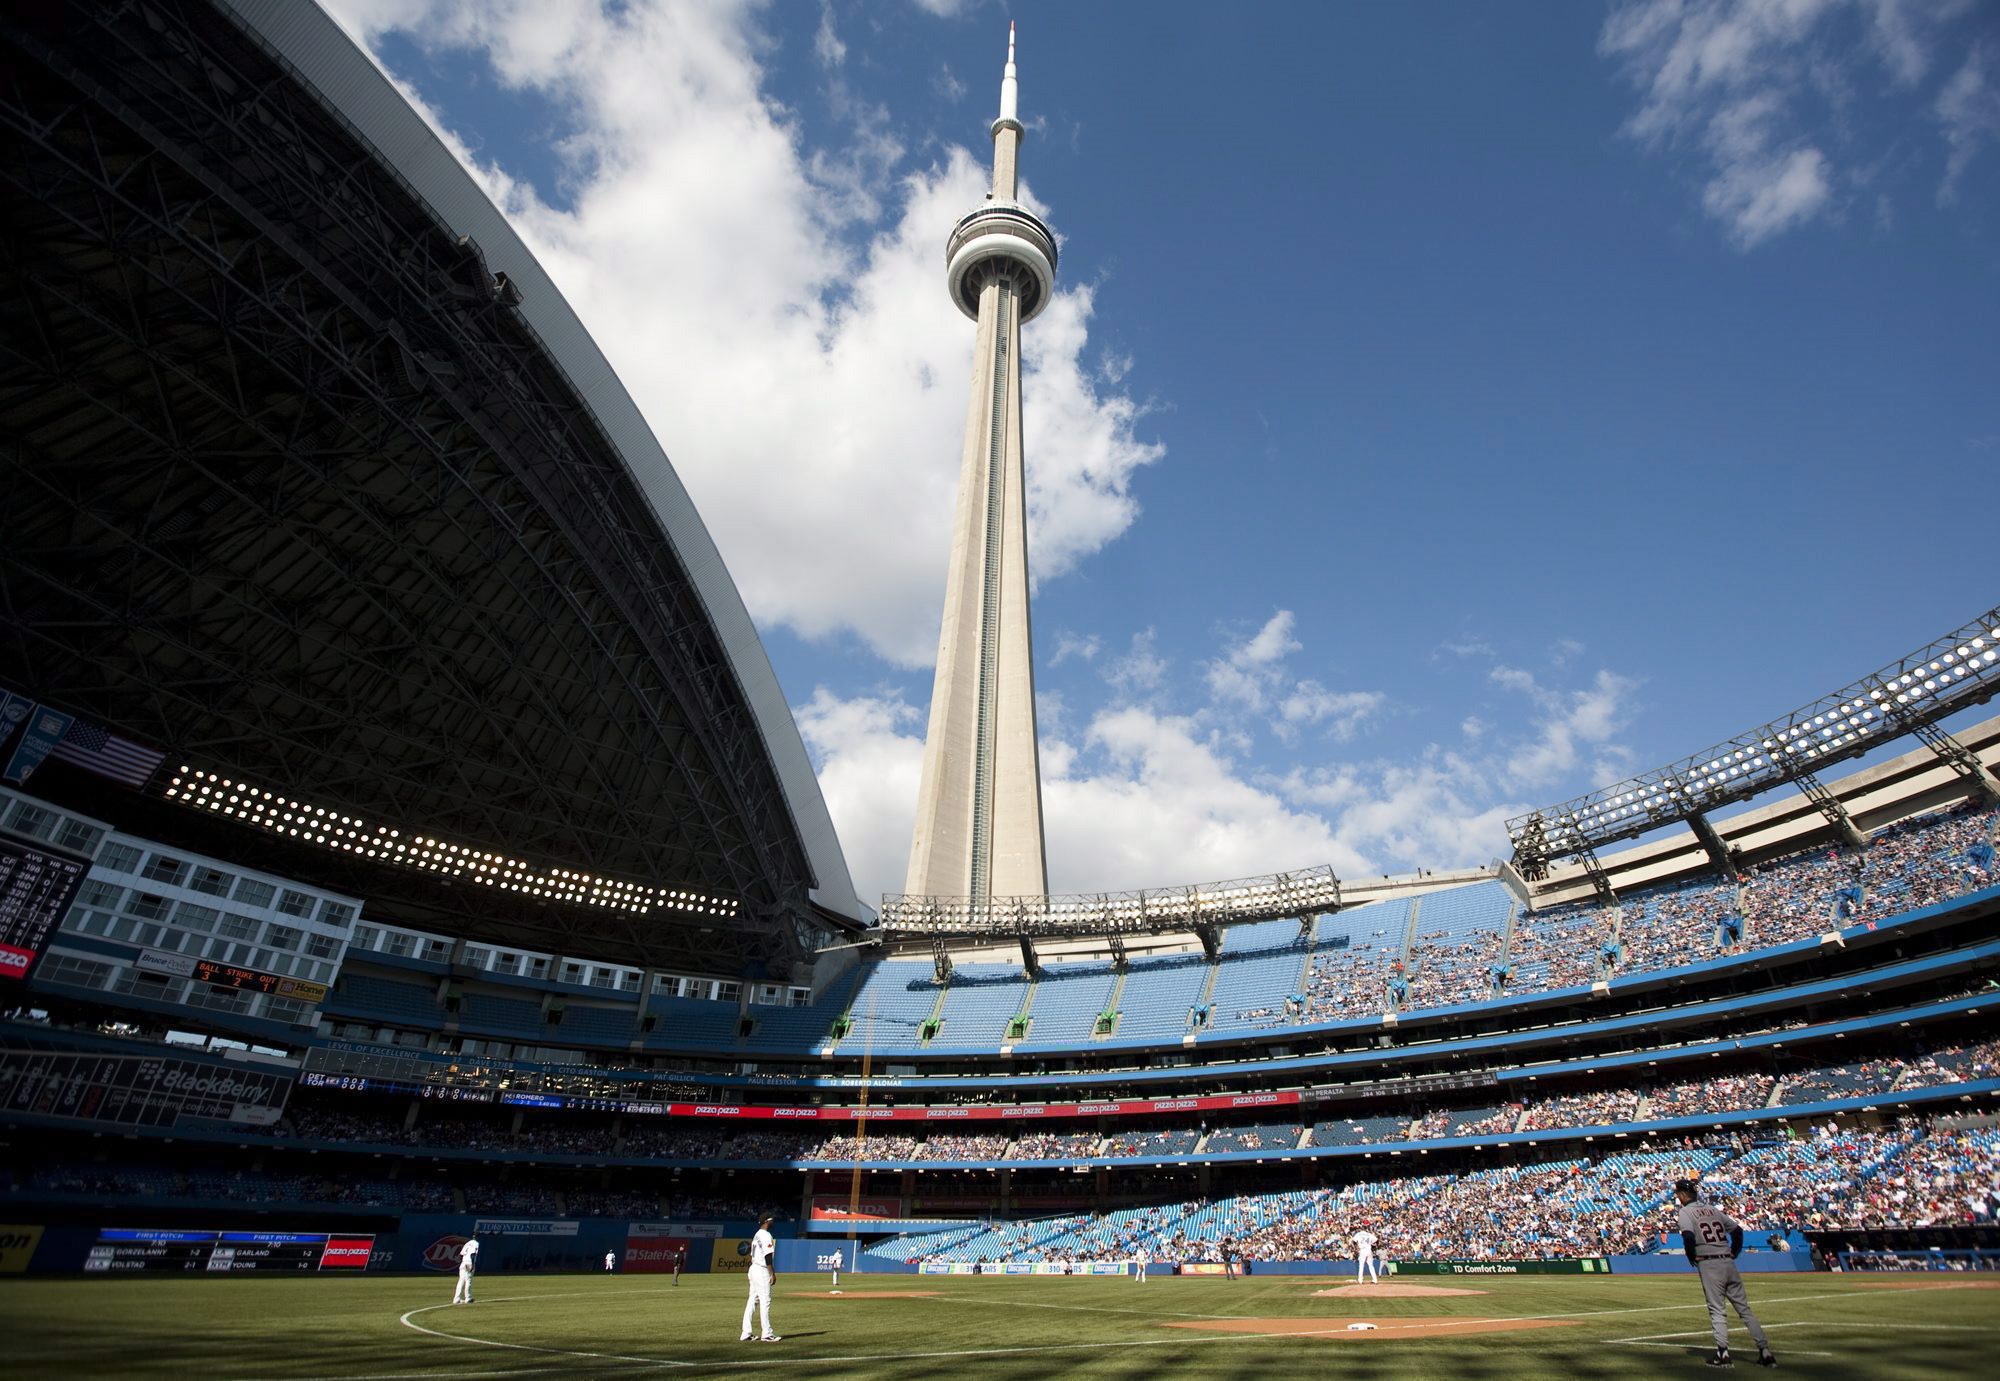 Flipping its lid: The story behind the retractable roof at Rogers